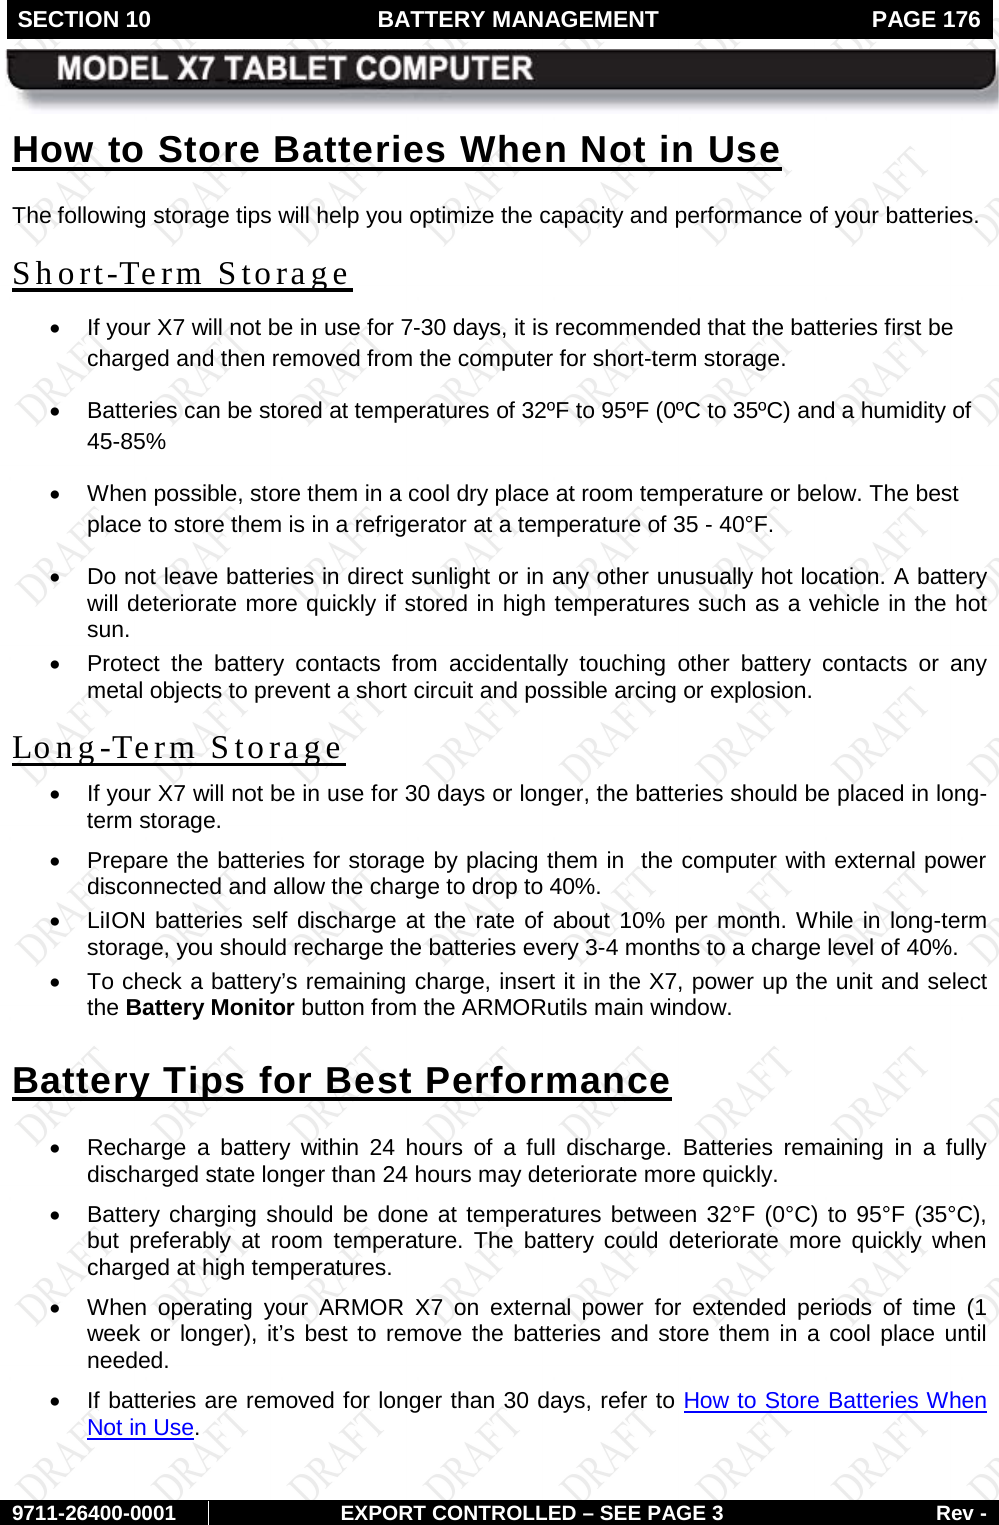 SECTION 10 BATTERY MANAGEMENT  PAGE 176        9711-26400-0001 EXPORT CONTROLLED – SEE PAGE 3 Rev - How to Store Batteries When Not in Use The following storage tips will help you optimize the capacity and performance of your batteries. Short-Term Storage • If your X7 will not be in use for 7-30 days, it is recommended that the batteries first be charged and then removed from the computer for short-term storage. • Batteries can be stored at temperatures of 32ºF to 95ºF (0ºC to 35ºC) and a humidity of 45-85% • When possible, store them in a cool dry place at room temperature or below. The best place to store them is in a refrigerator at a temperature of 35 - 40°F. • Do not leave batteries in direct sunlight or in any other unusually hot location. A battery will deteriorate more quickly if stored in high temperatures such as a vehicle in the hot sun.  • Protect the battery contacts from accidentally touching other battery contacts or any metal objects to prevent a short circuit and possible arcing or explosion. Long-Term Storage • If your X7 will not be in use for 30 days or longer, the batteries should be placed in long-term storage. • Prepare the batteries for storage by placing them in  the computer with external power disconnected and allow the charge to drop to 40%. • LiION batteries self discharge at the rate of about 10% per month. While in long-term storage, you should recharge the batteries every 3-4 months to a charge level of 40%.  •  To check a battery’s remaining charge, insert it in the X7, power up the unit and select the Battery Monitor button from the ARMORutils main window. Battery Tips for Best Performance • Recharge  a  battery  within 24 hours of a full discharge. Batteries remaining in a fully discharged state longer than 24 hours may deteriorate more quickly.  • Battery charging should be done at temperatures between 32°F (0°C) to 95°F (35°C), but  preferably at room temperature. The battery could deteriorate more quickly when charged at high temperatures. • When operating your ARMOR X7 on external power for extended periods of time (1 week or longer), it’s best to remove the batteries and store them in a cool place until needed.  • If batteries are removed for longer than 30 days, refer to How to Store Batteries When Not in Use. 